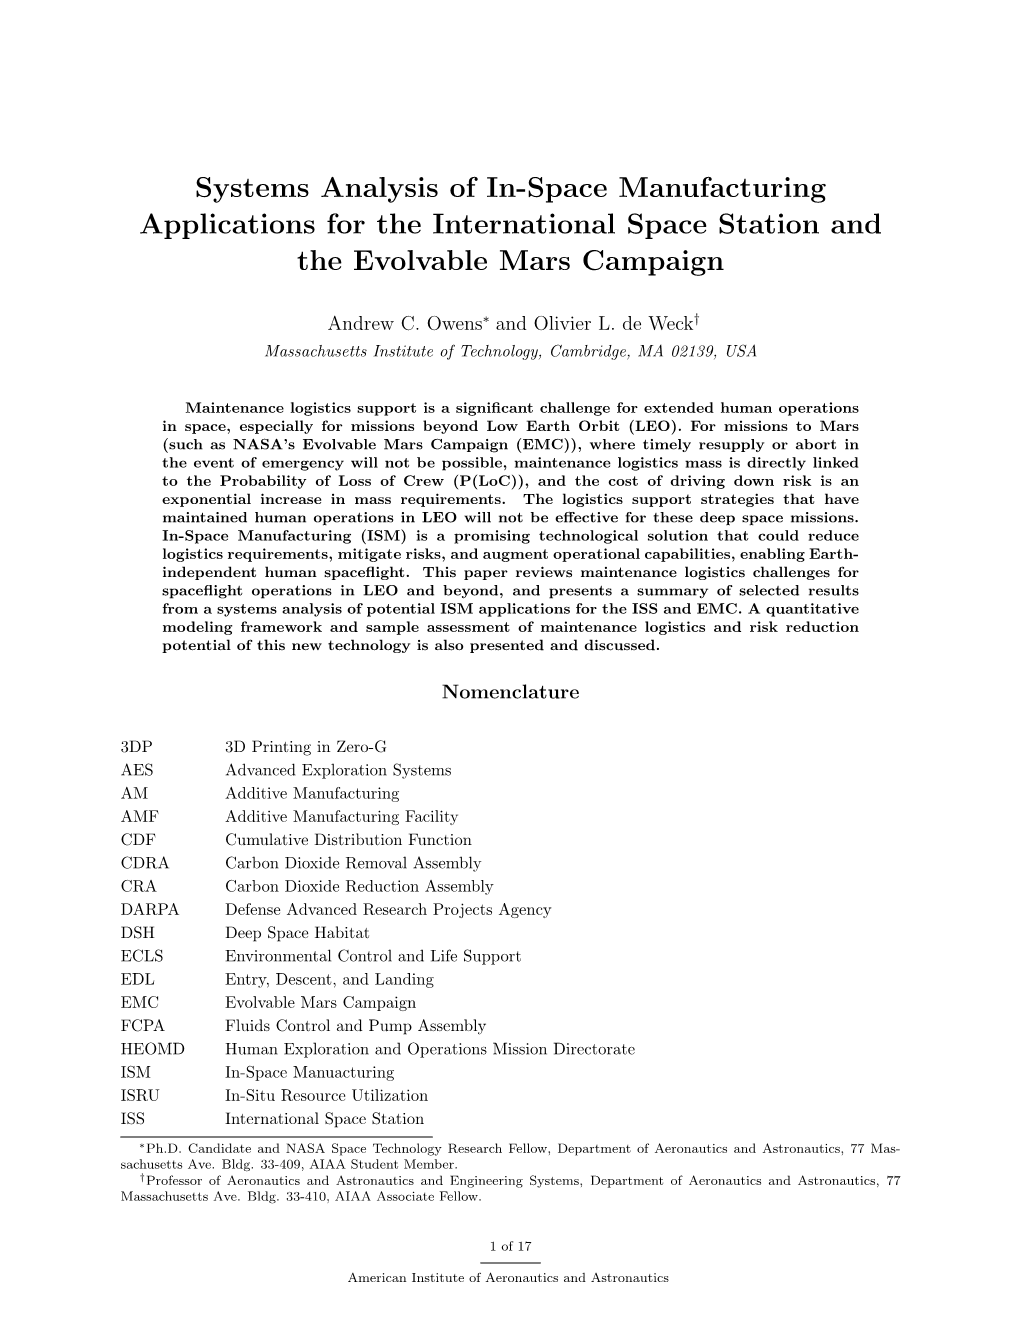 Systems Analysis of In-Space Manufacturing Applications for the International Space Station and the Evolvable Mars Campaign